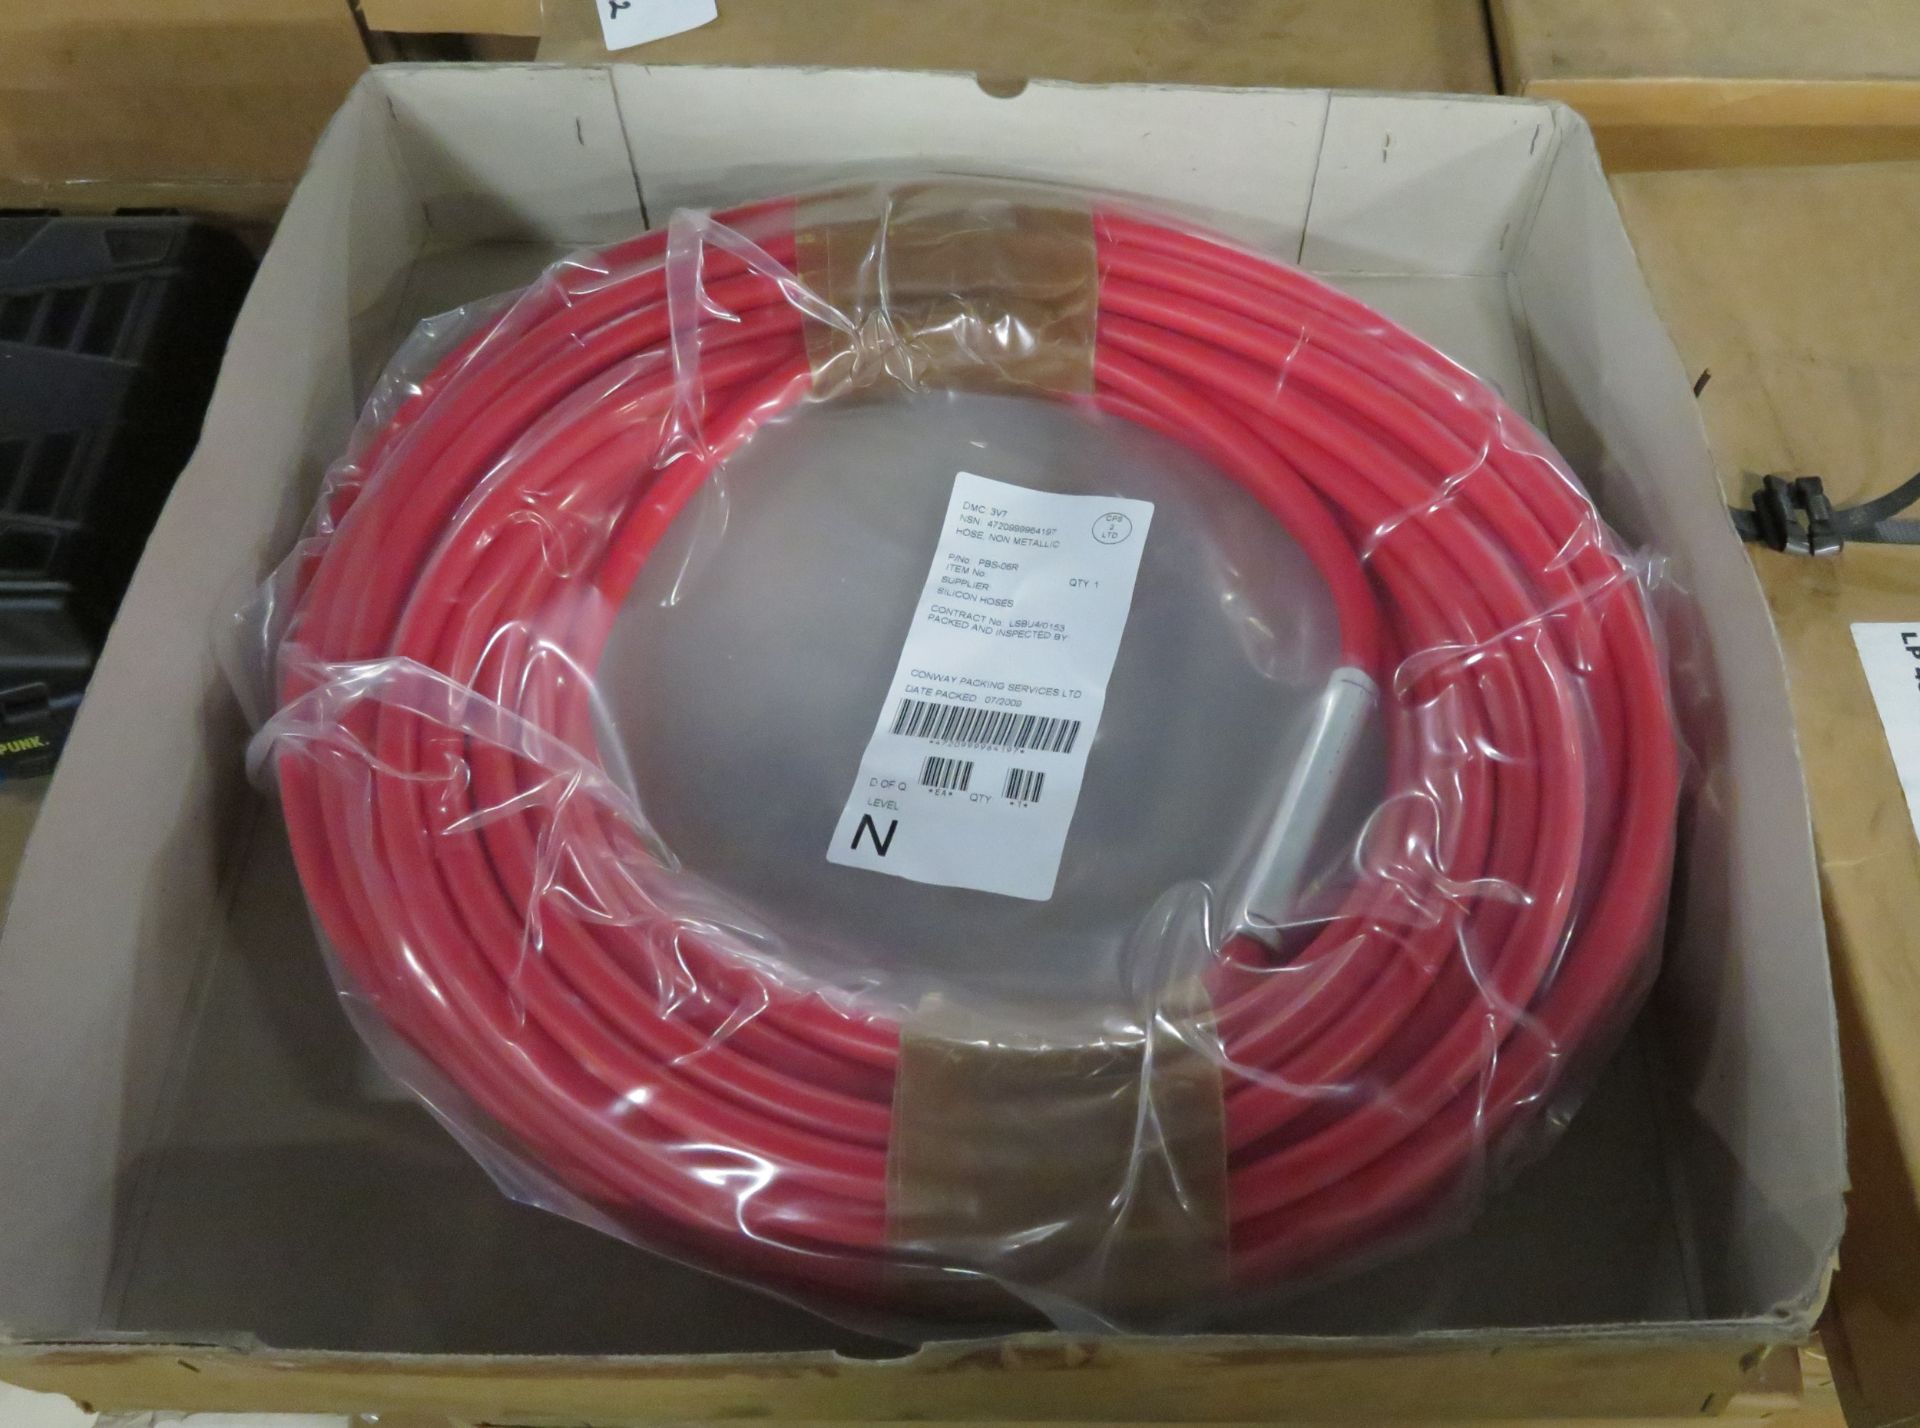 42x Hoses Nonmetallic Red In a Box - Image 2 of 4